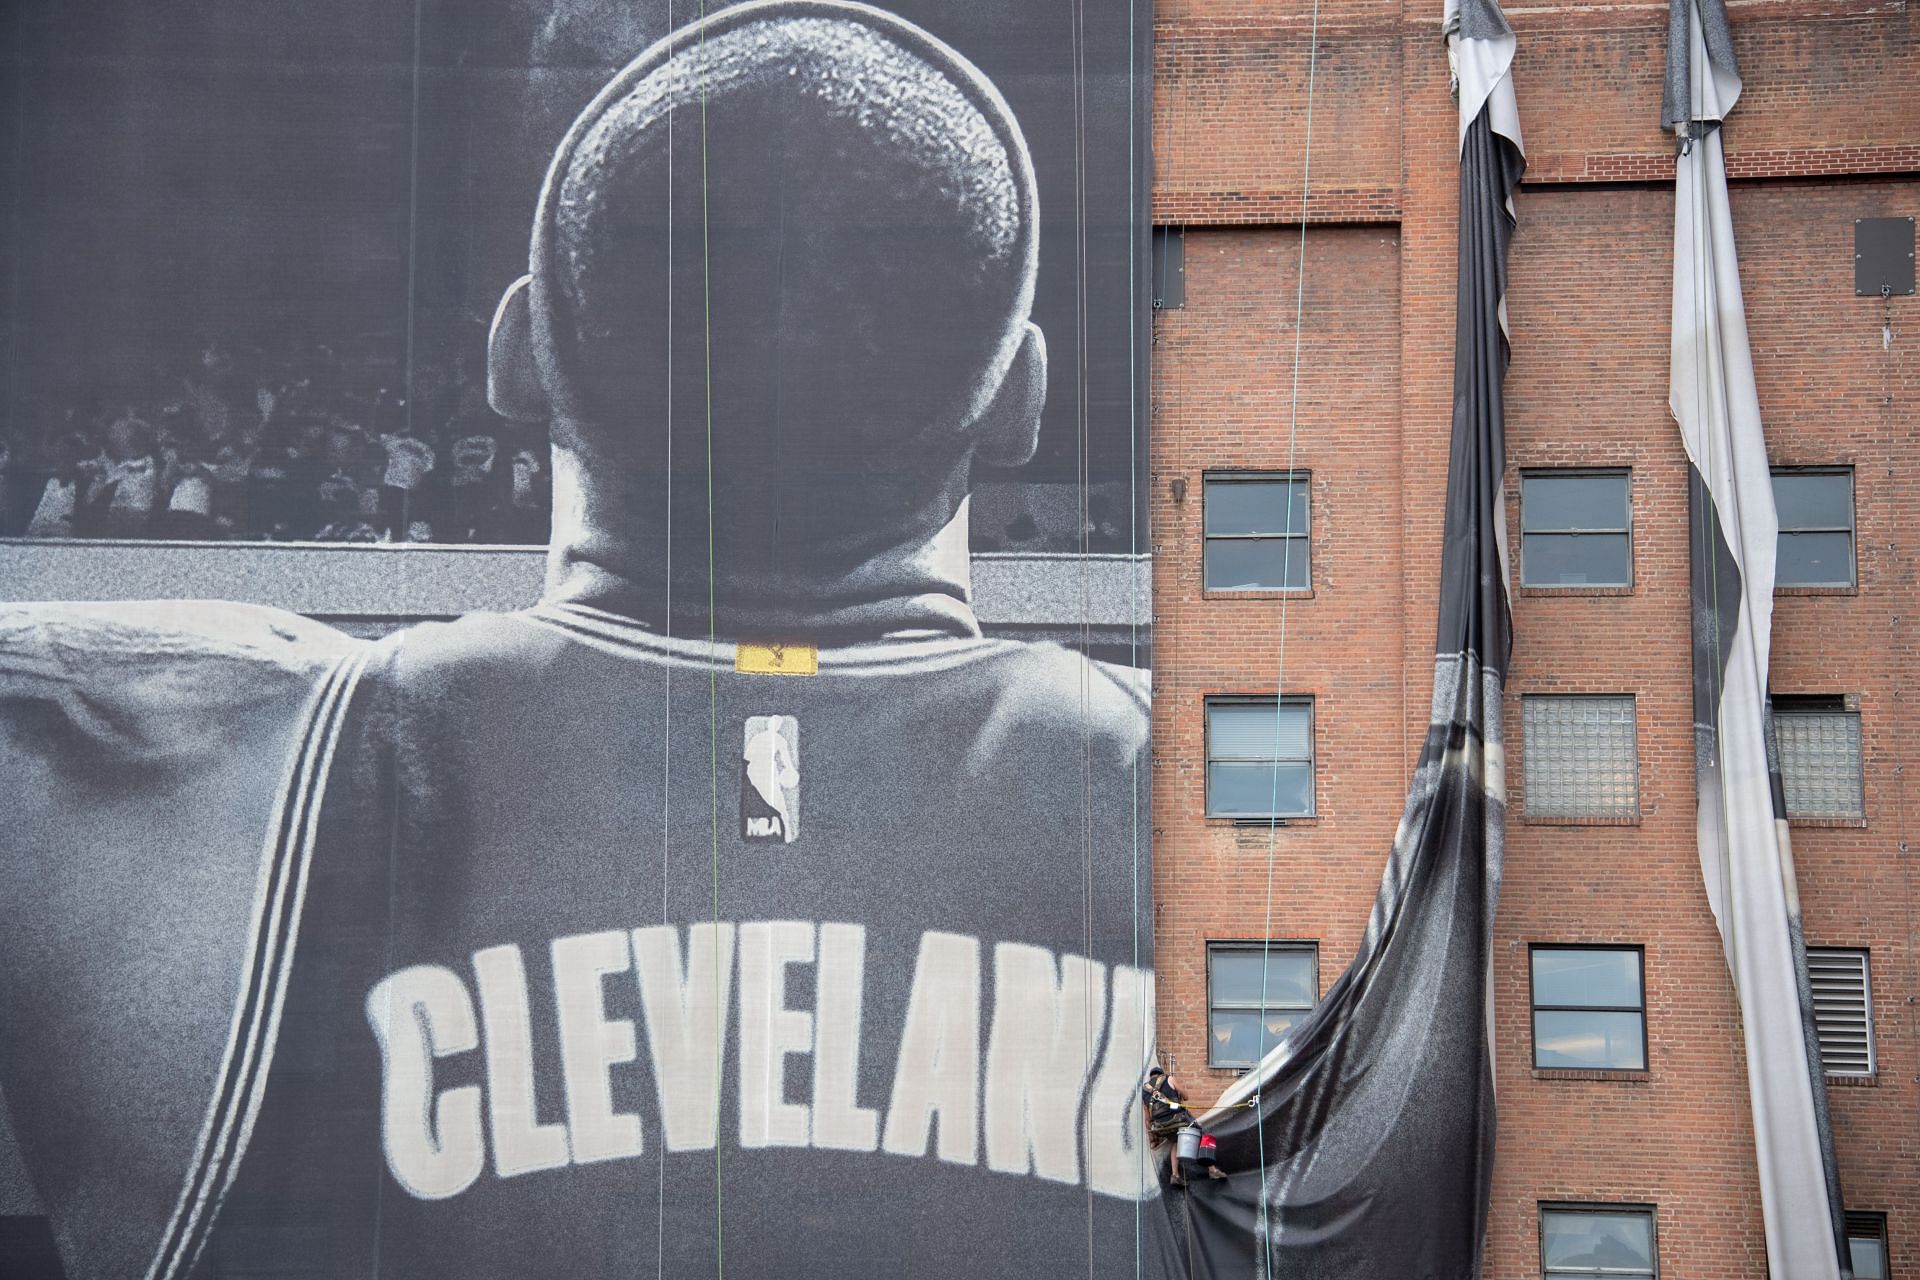 LeBron James Banner Removed From Outside Cleveland Cavaliers